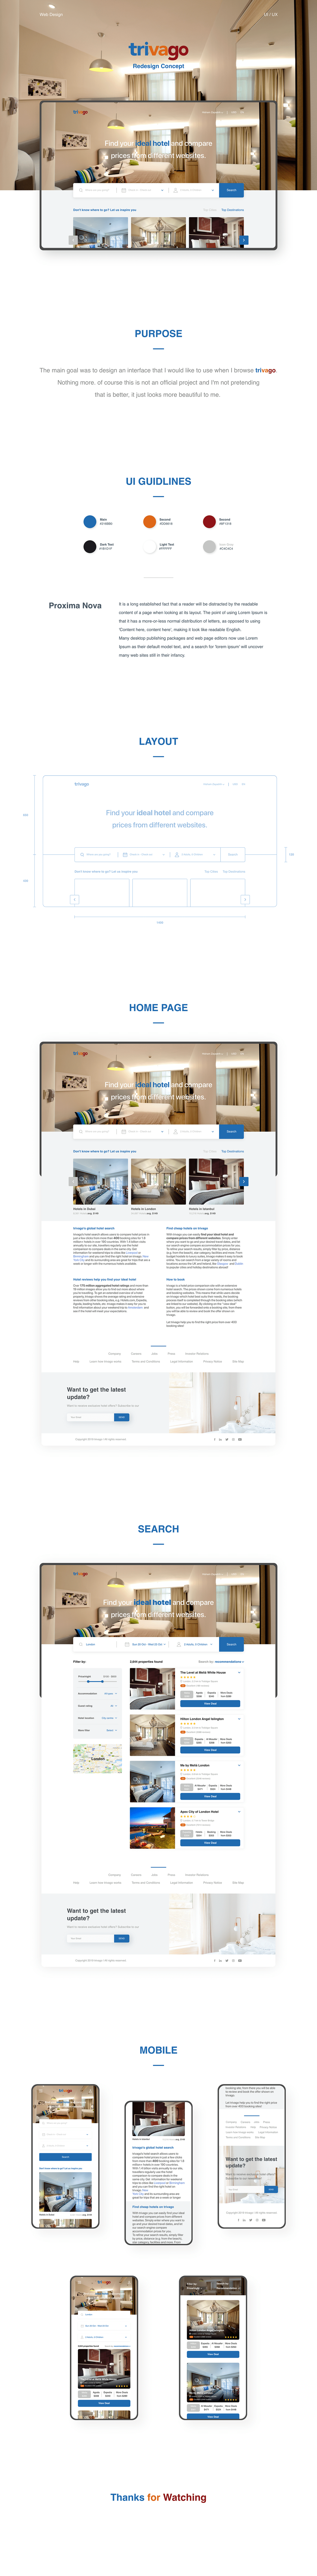 trivago  redesign Web UI ux Interface hotels Booking Adobe XD